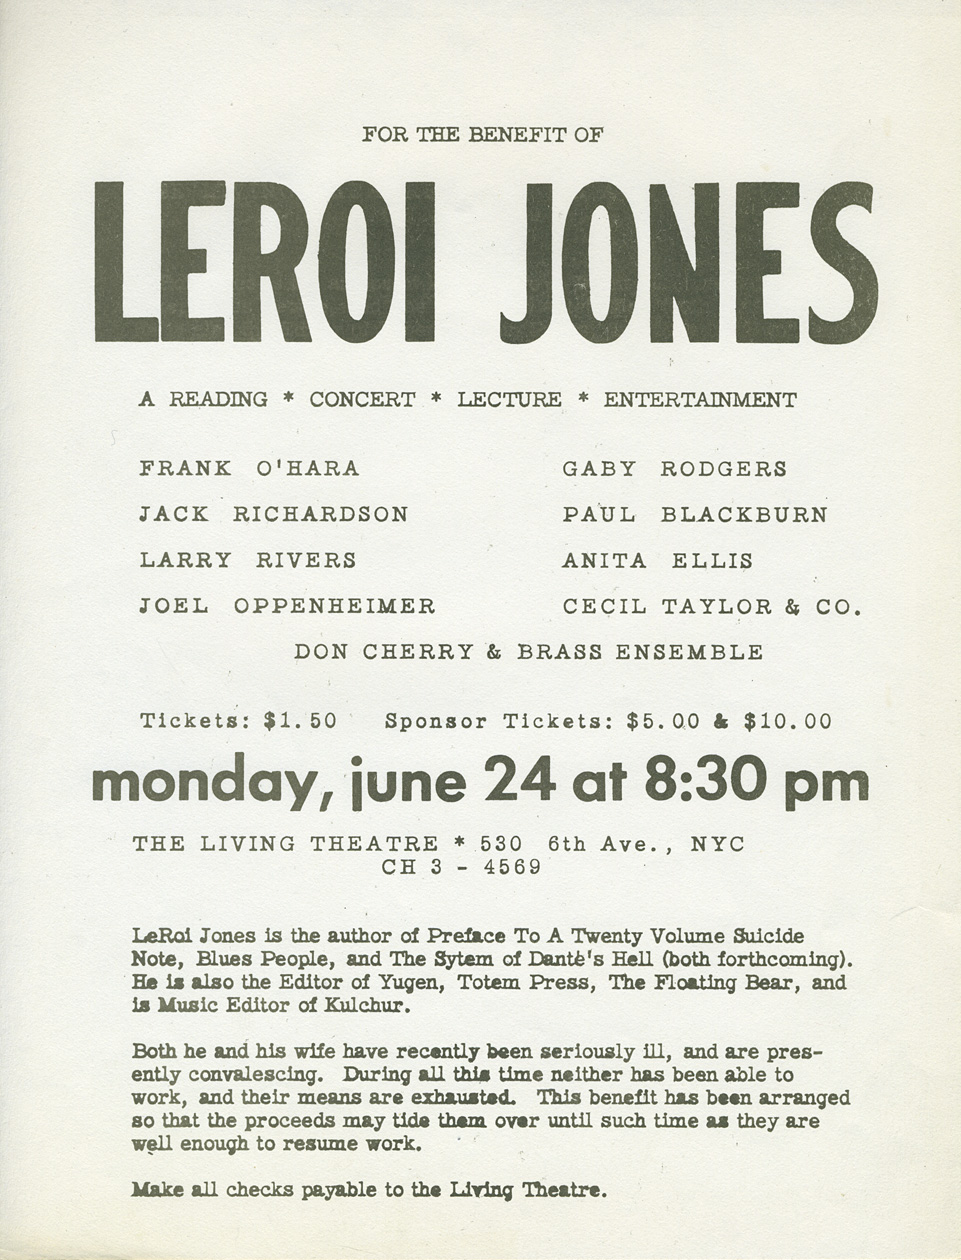 Reading, concert, lecture, and entertainment to benefit Leroi and Hettie Jones, featuring Frank O’Hara, Gaby Rodgers, Jack Richardson, Paul Blackburn, Larry Rivers, Anita, Ellis, Joel Oppenheimer, Cecil Taylor & Co., and Don Cherry & Brass Ensemble at the Living Theatre, June 24, 1963. 8 1/2 x 11 inches.